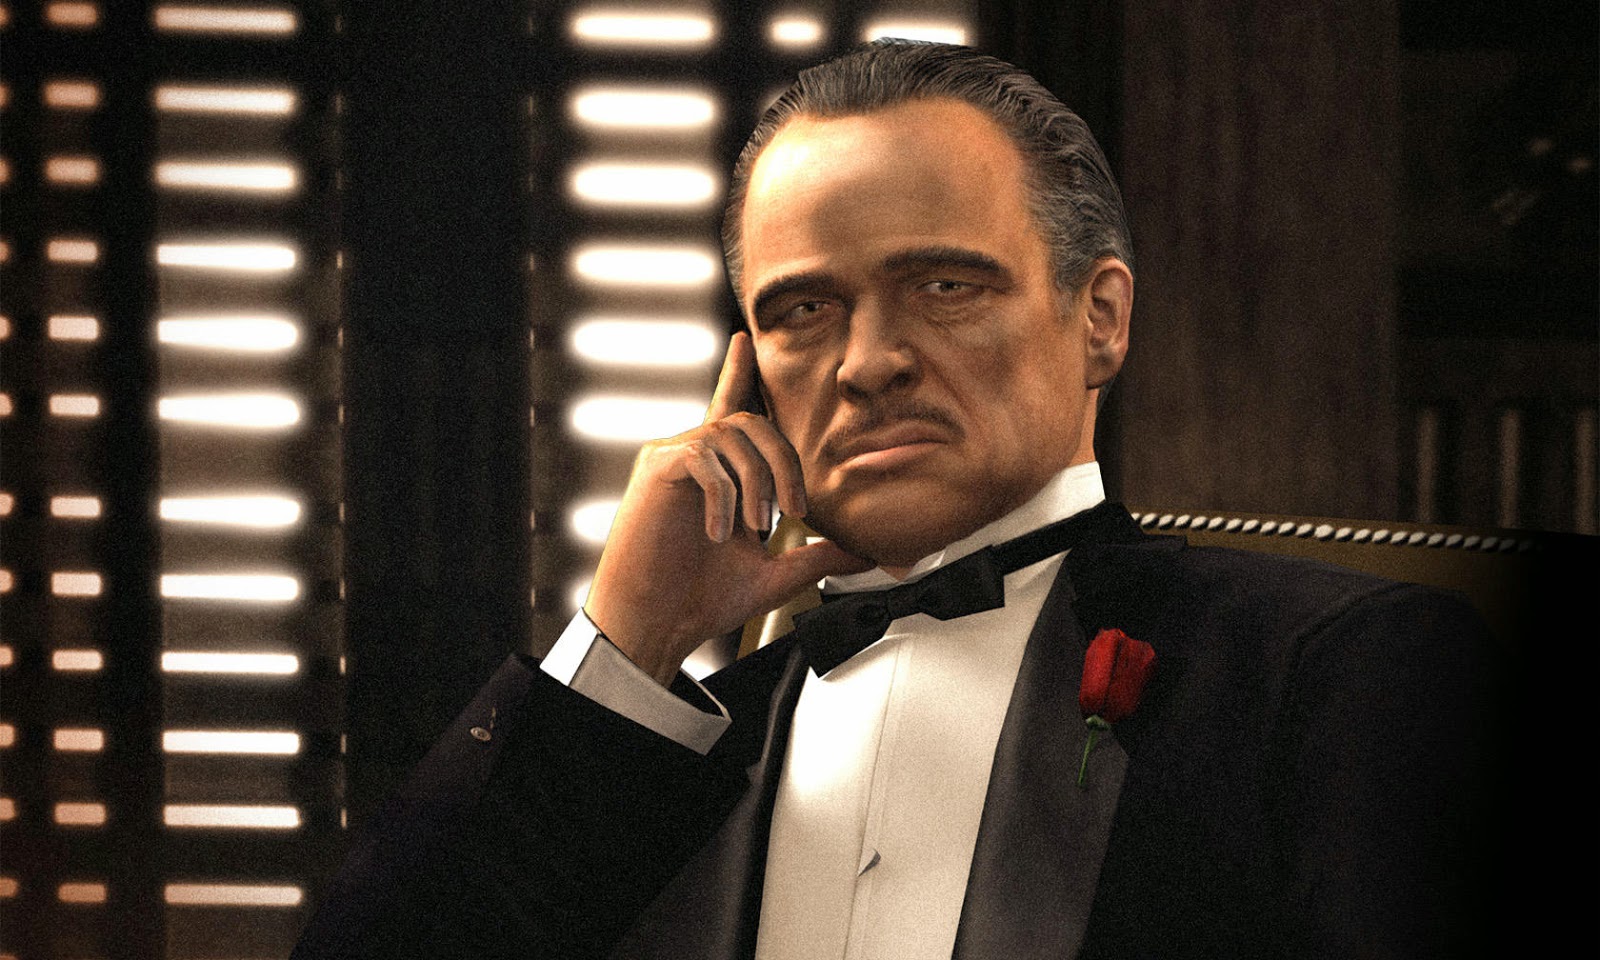 the godfather pc torrents juegos